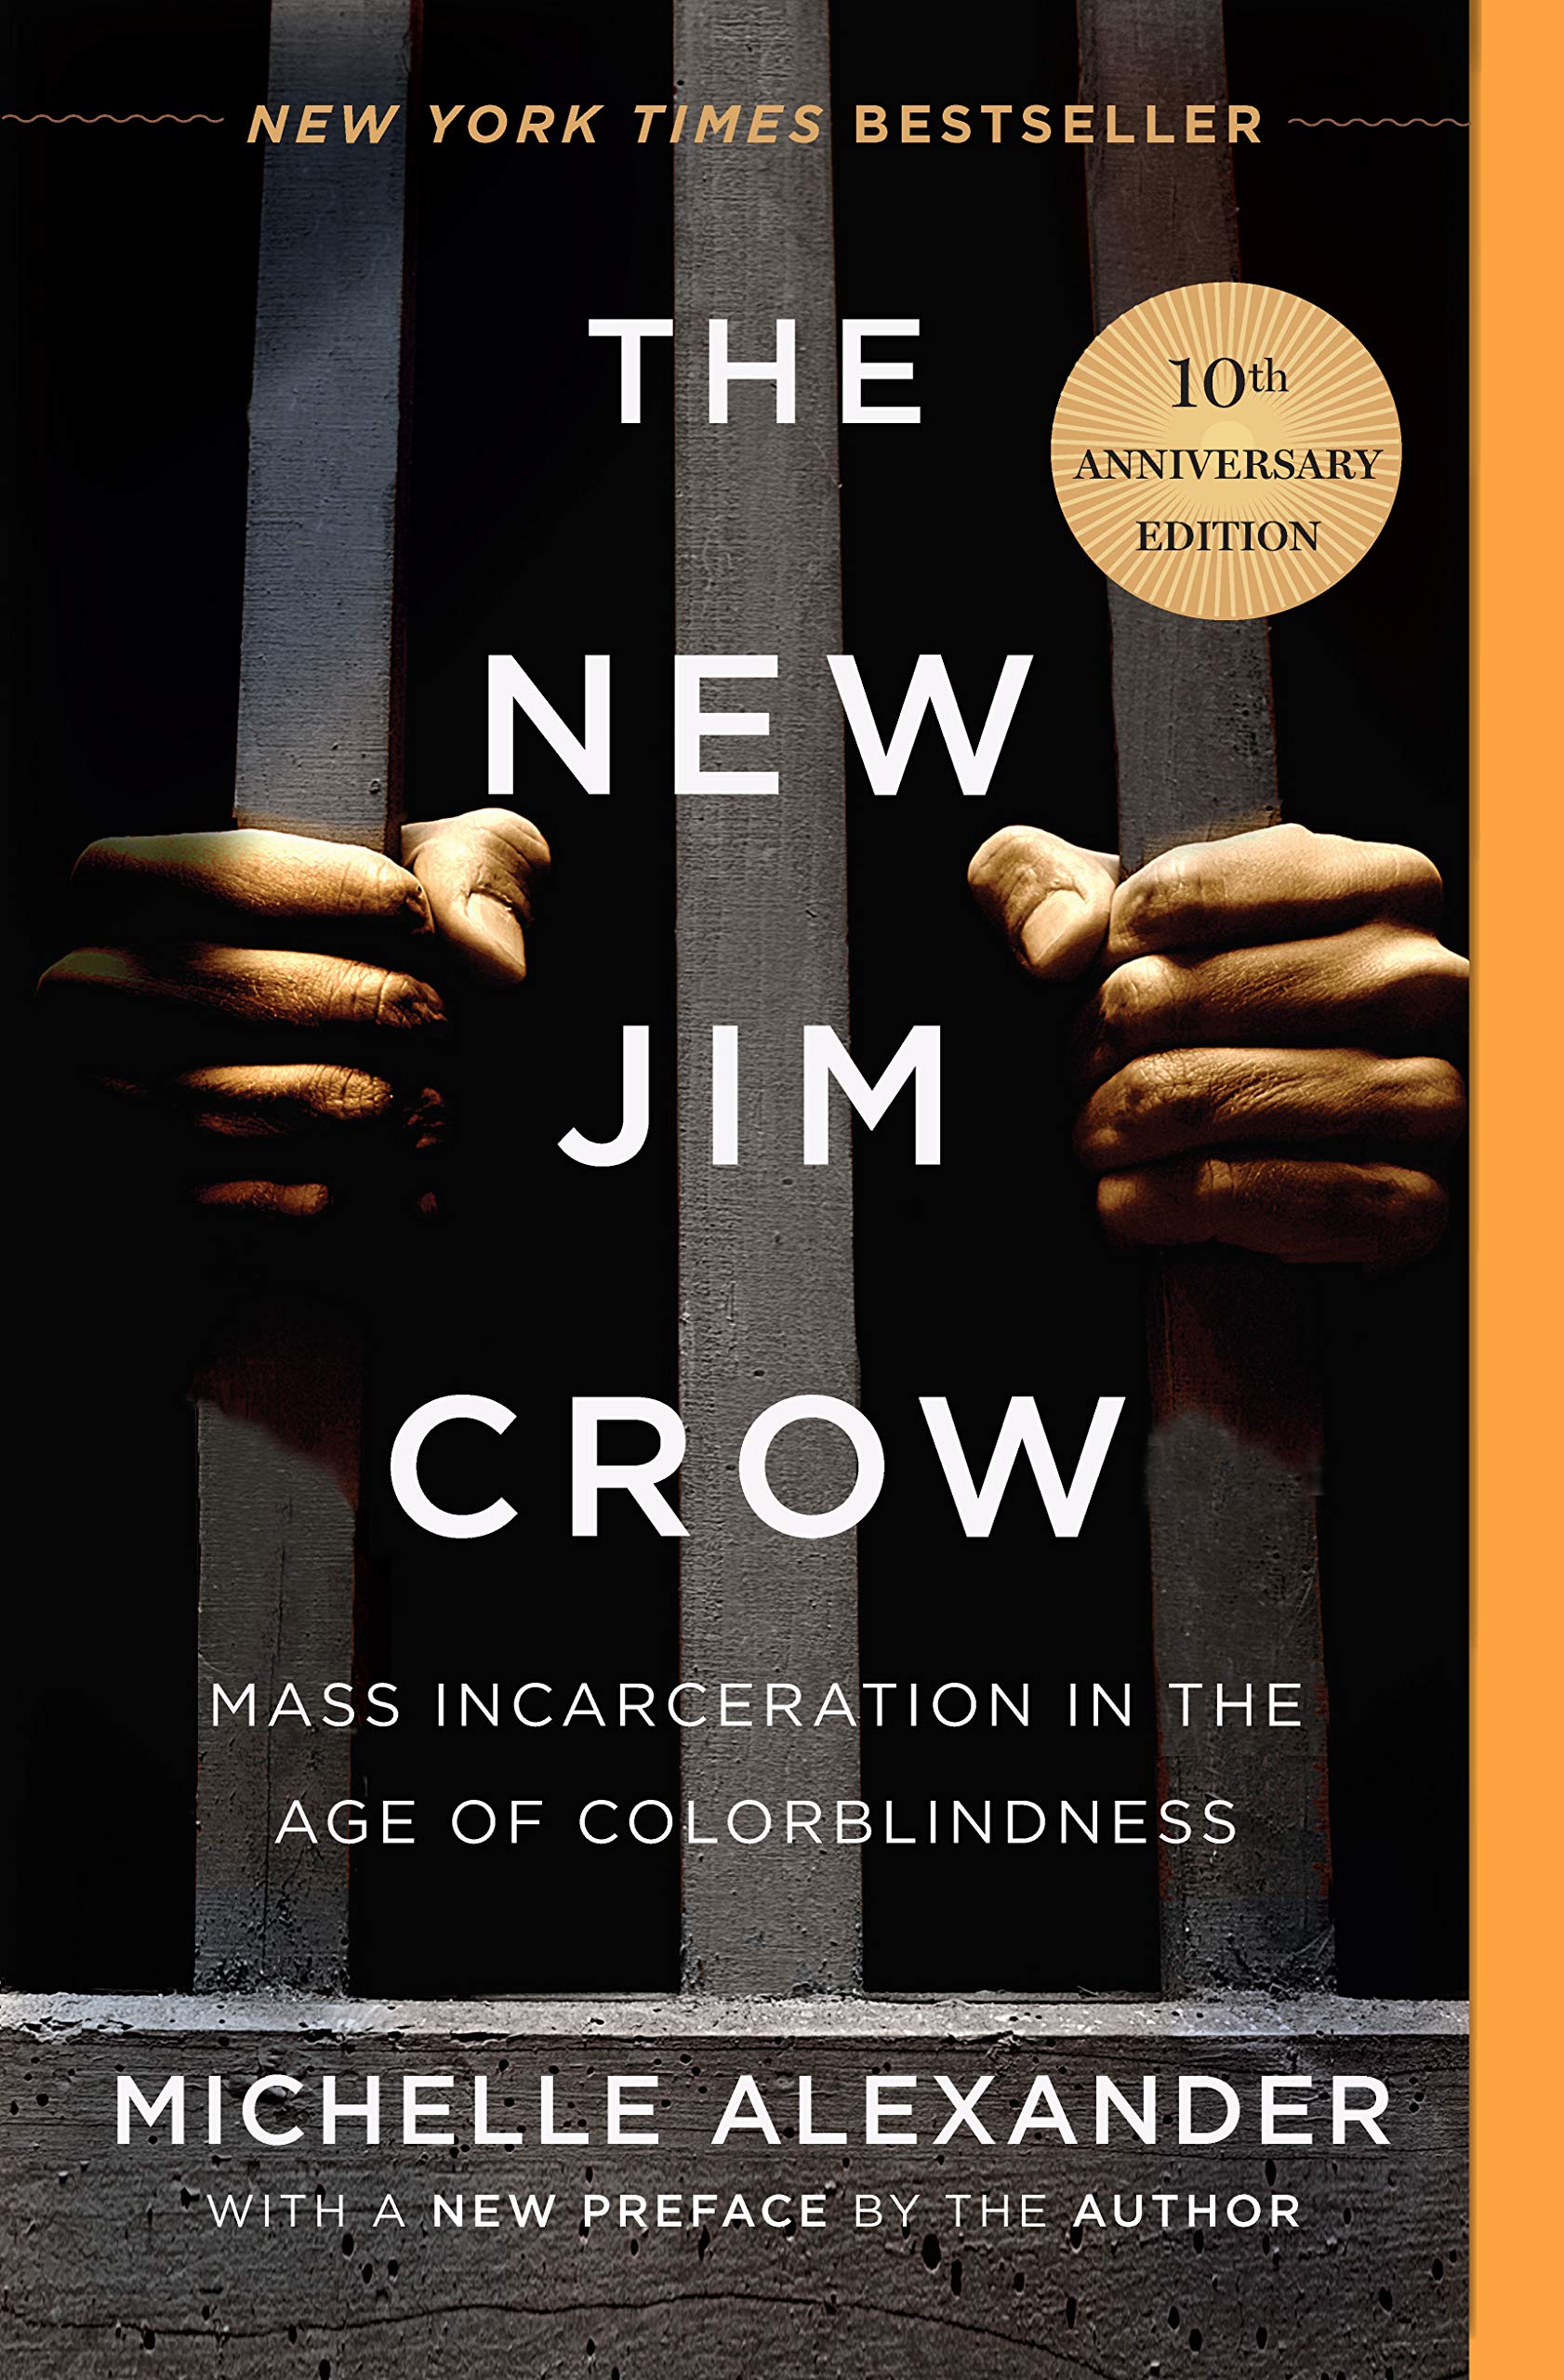 Image of the cover of The New Jim Crow: Mass Incarceration in the Age of Colorblindness (The New Press, 2010) by Michelle Alexander